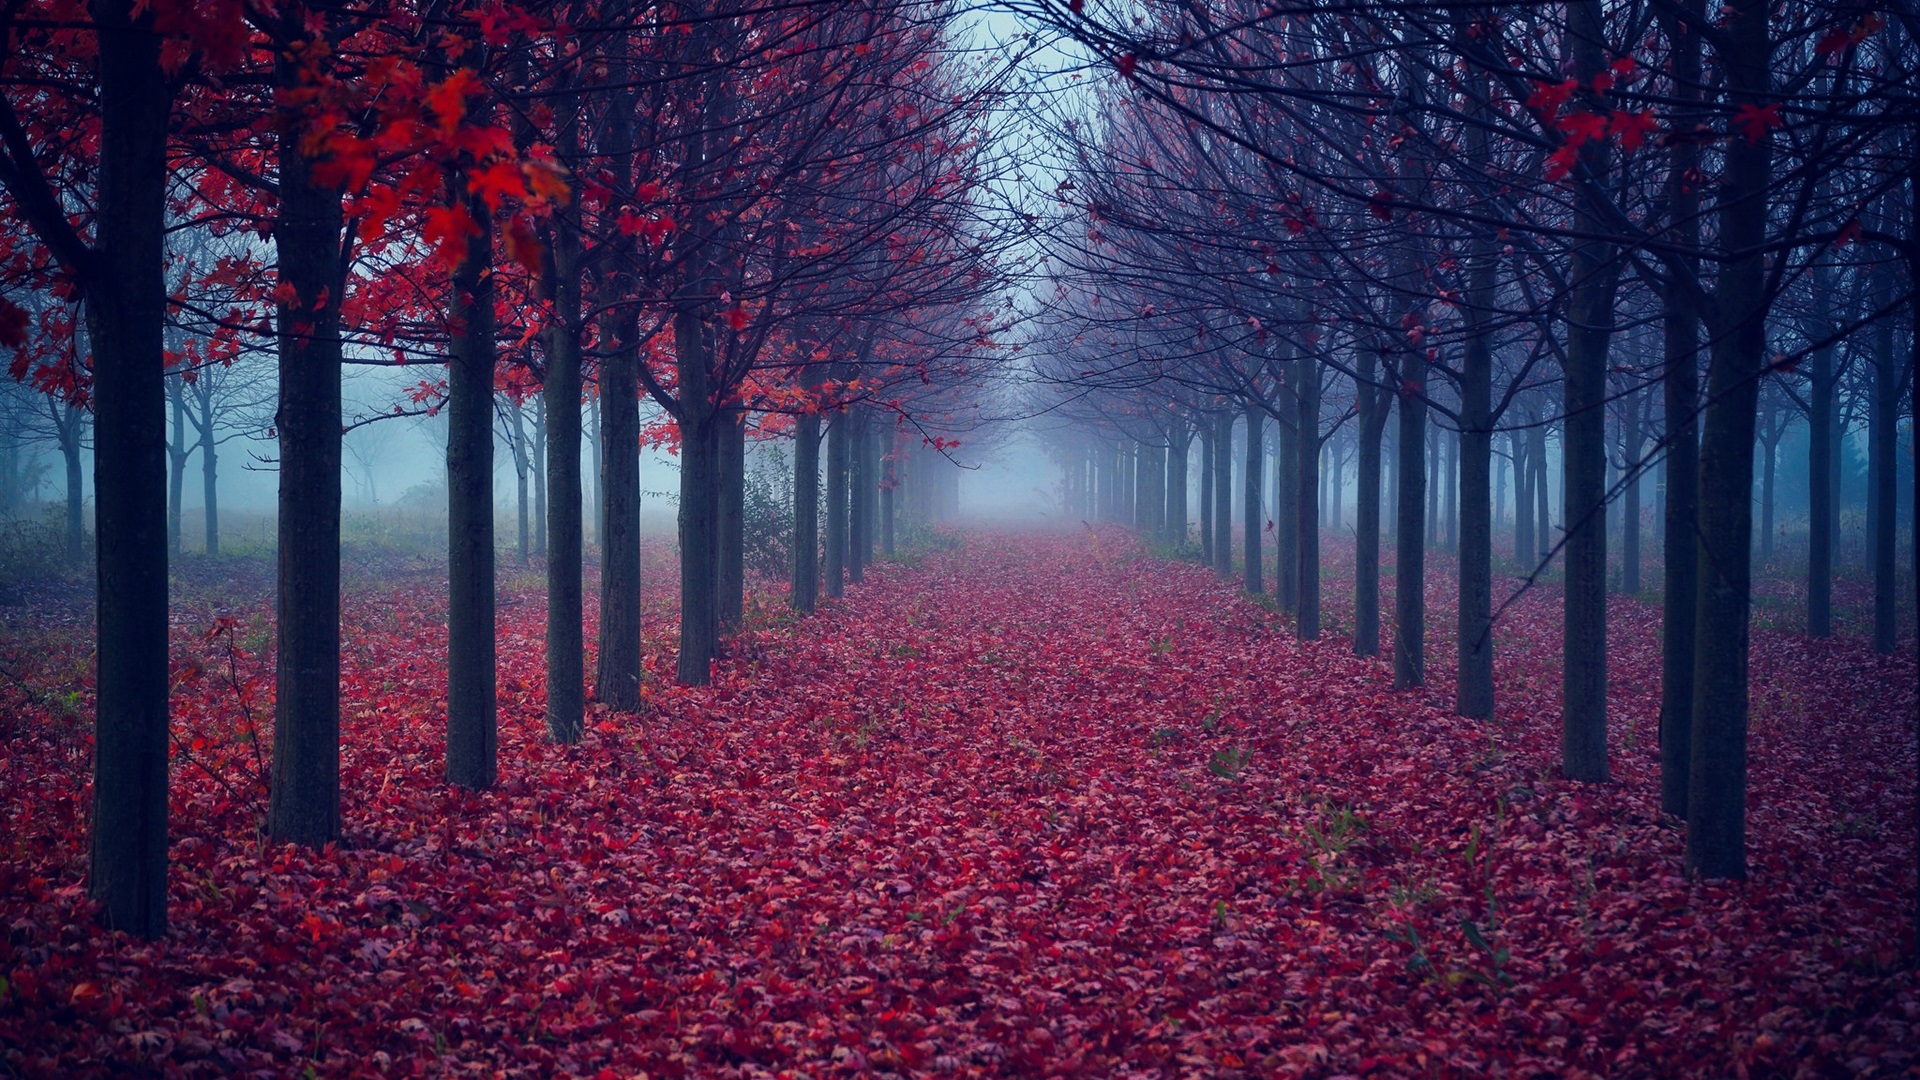 General 1920x1080 fall nature trees leaves mist forest landscape